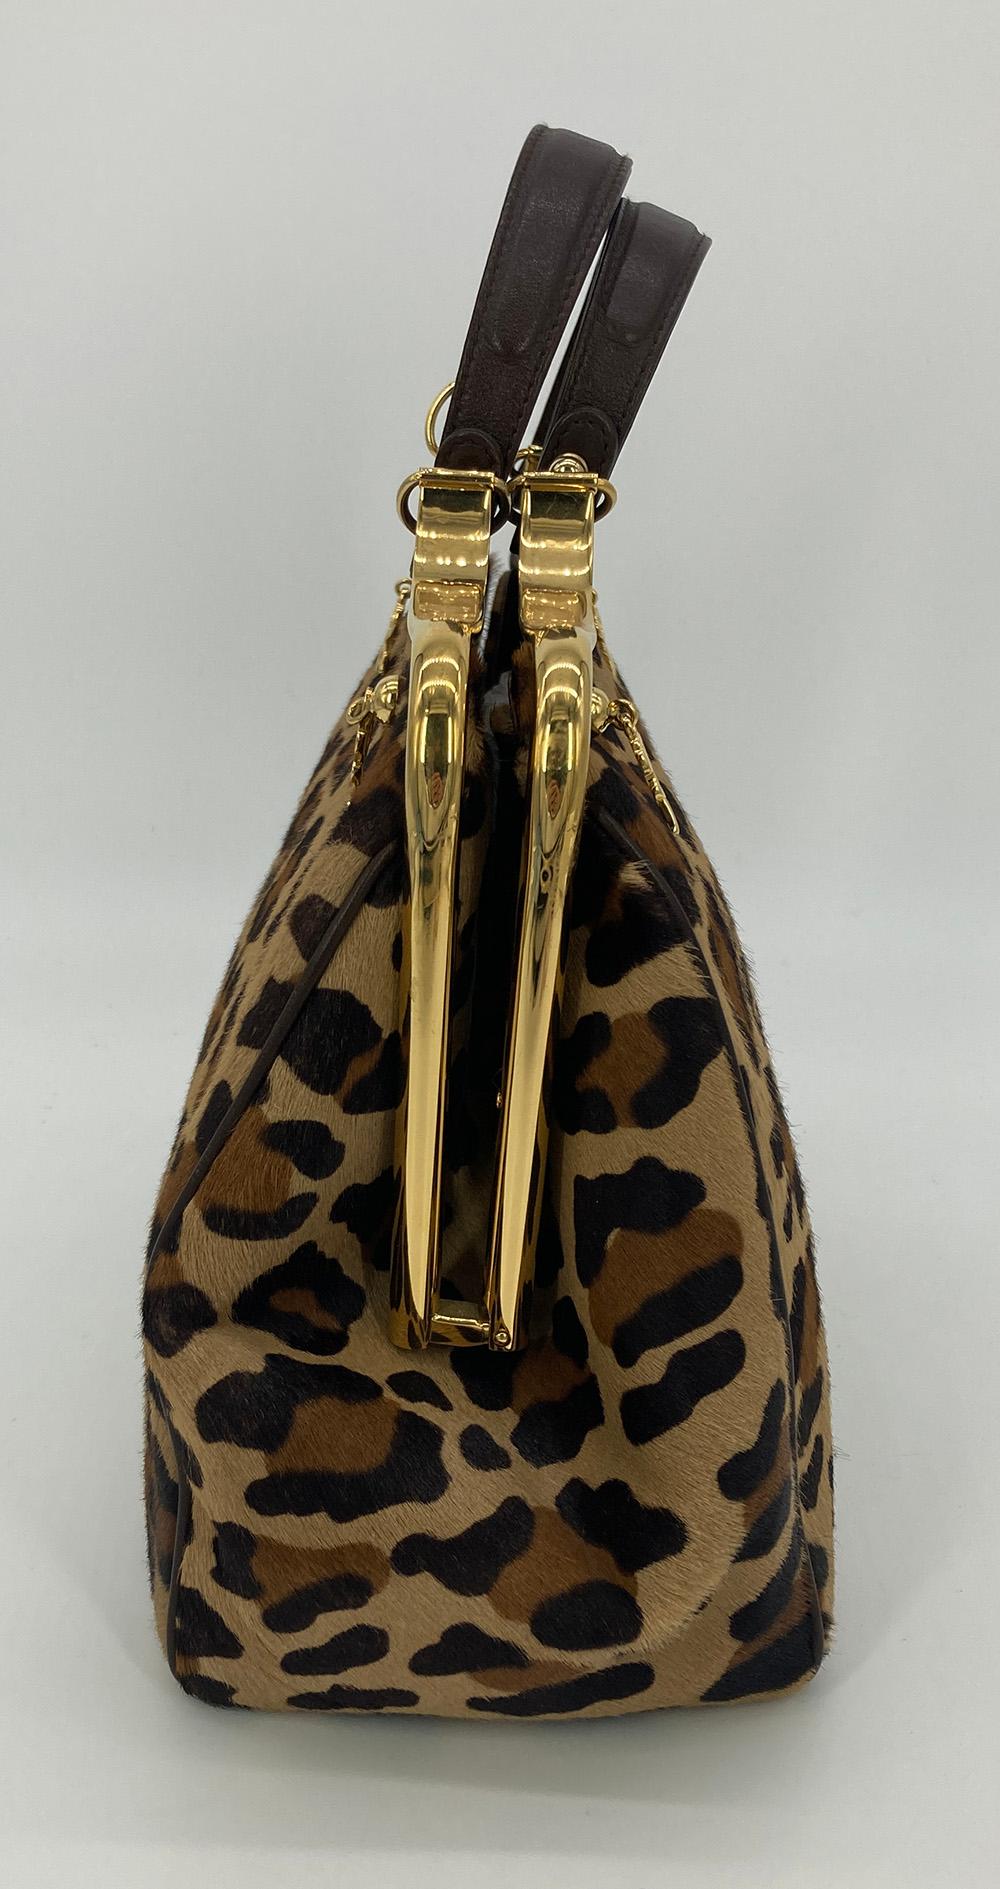 Roberta Di Camerino Leopard Print Pony Hair Frame Bag in very good condition. Leopard print pony hair exterior trimmed with brown leather handles and gold hardware. Signature gold 